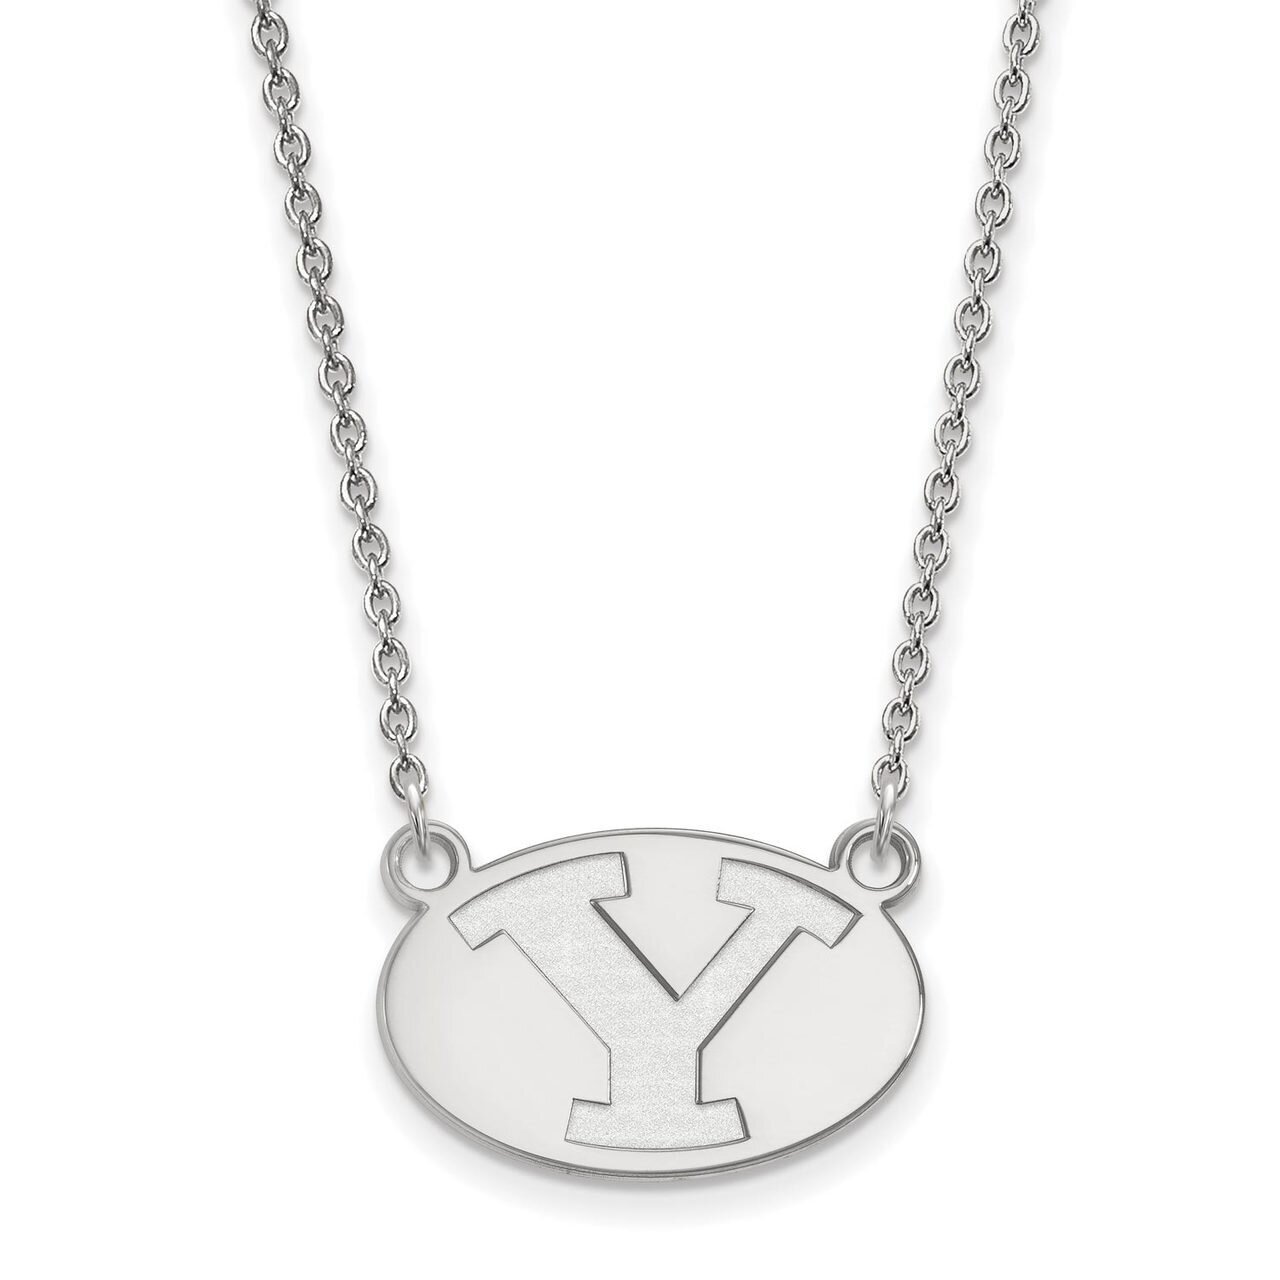 Brigham Young University Small Pendant with Chain Necklace 14k White Gold 4W009BYU-18